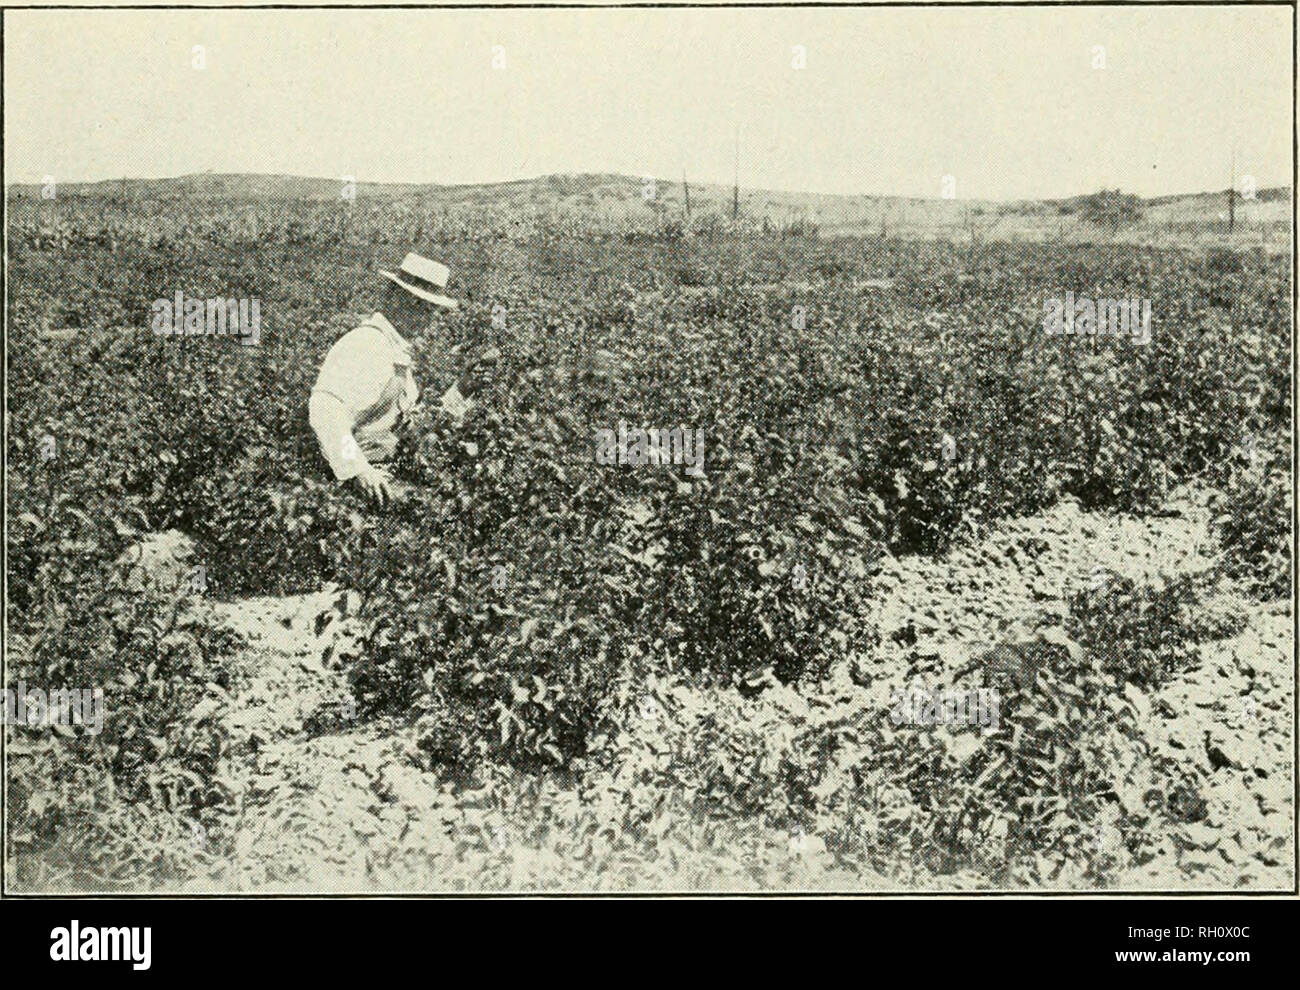 . Bulletin. Agriculture; Agriculture -- Arizona. Arizona AcricuIvTural Experiment Station 423 TABI,E IV. YIELDS OF POT.TOI-.S ON PRESCOTT DRY EARM, 1917 Variety Peerless Rural New Yorker. H i( II Early Rose White Rose Russet Burbank. . Date planted Y'ield per acre May 1 3.623 Ihs. •• 1 2,581 •• May 1 920 •• a 2.259 •' May 1 4,122 •• &quot; 2,720 •• Mav 1 1,817 •• &quot; 4,011 &quot; Mav 1 1.495 •• •' 1,309 ••. Fig. 11.—Potatoes. Prescott Dry Farm. SWEET CLOVER Trial plantings of White sweet clover {Mclilotits alba) were made late in May and late in July. A fair stand was obtained, but the gro Stock Photo